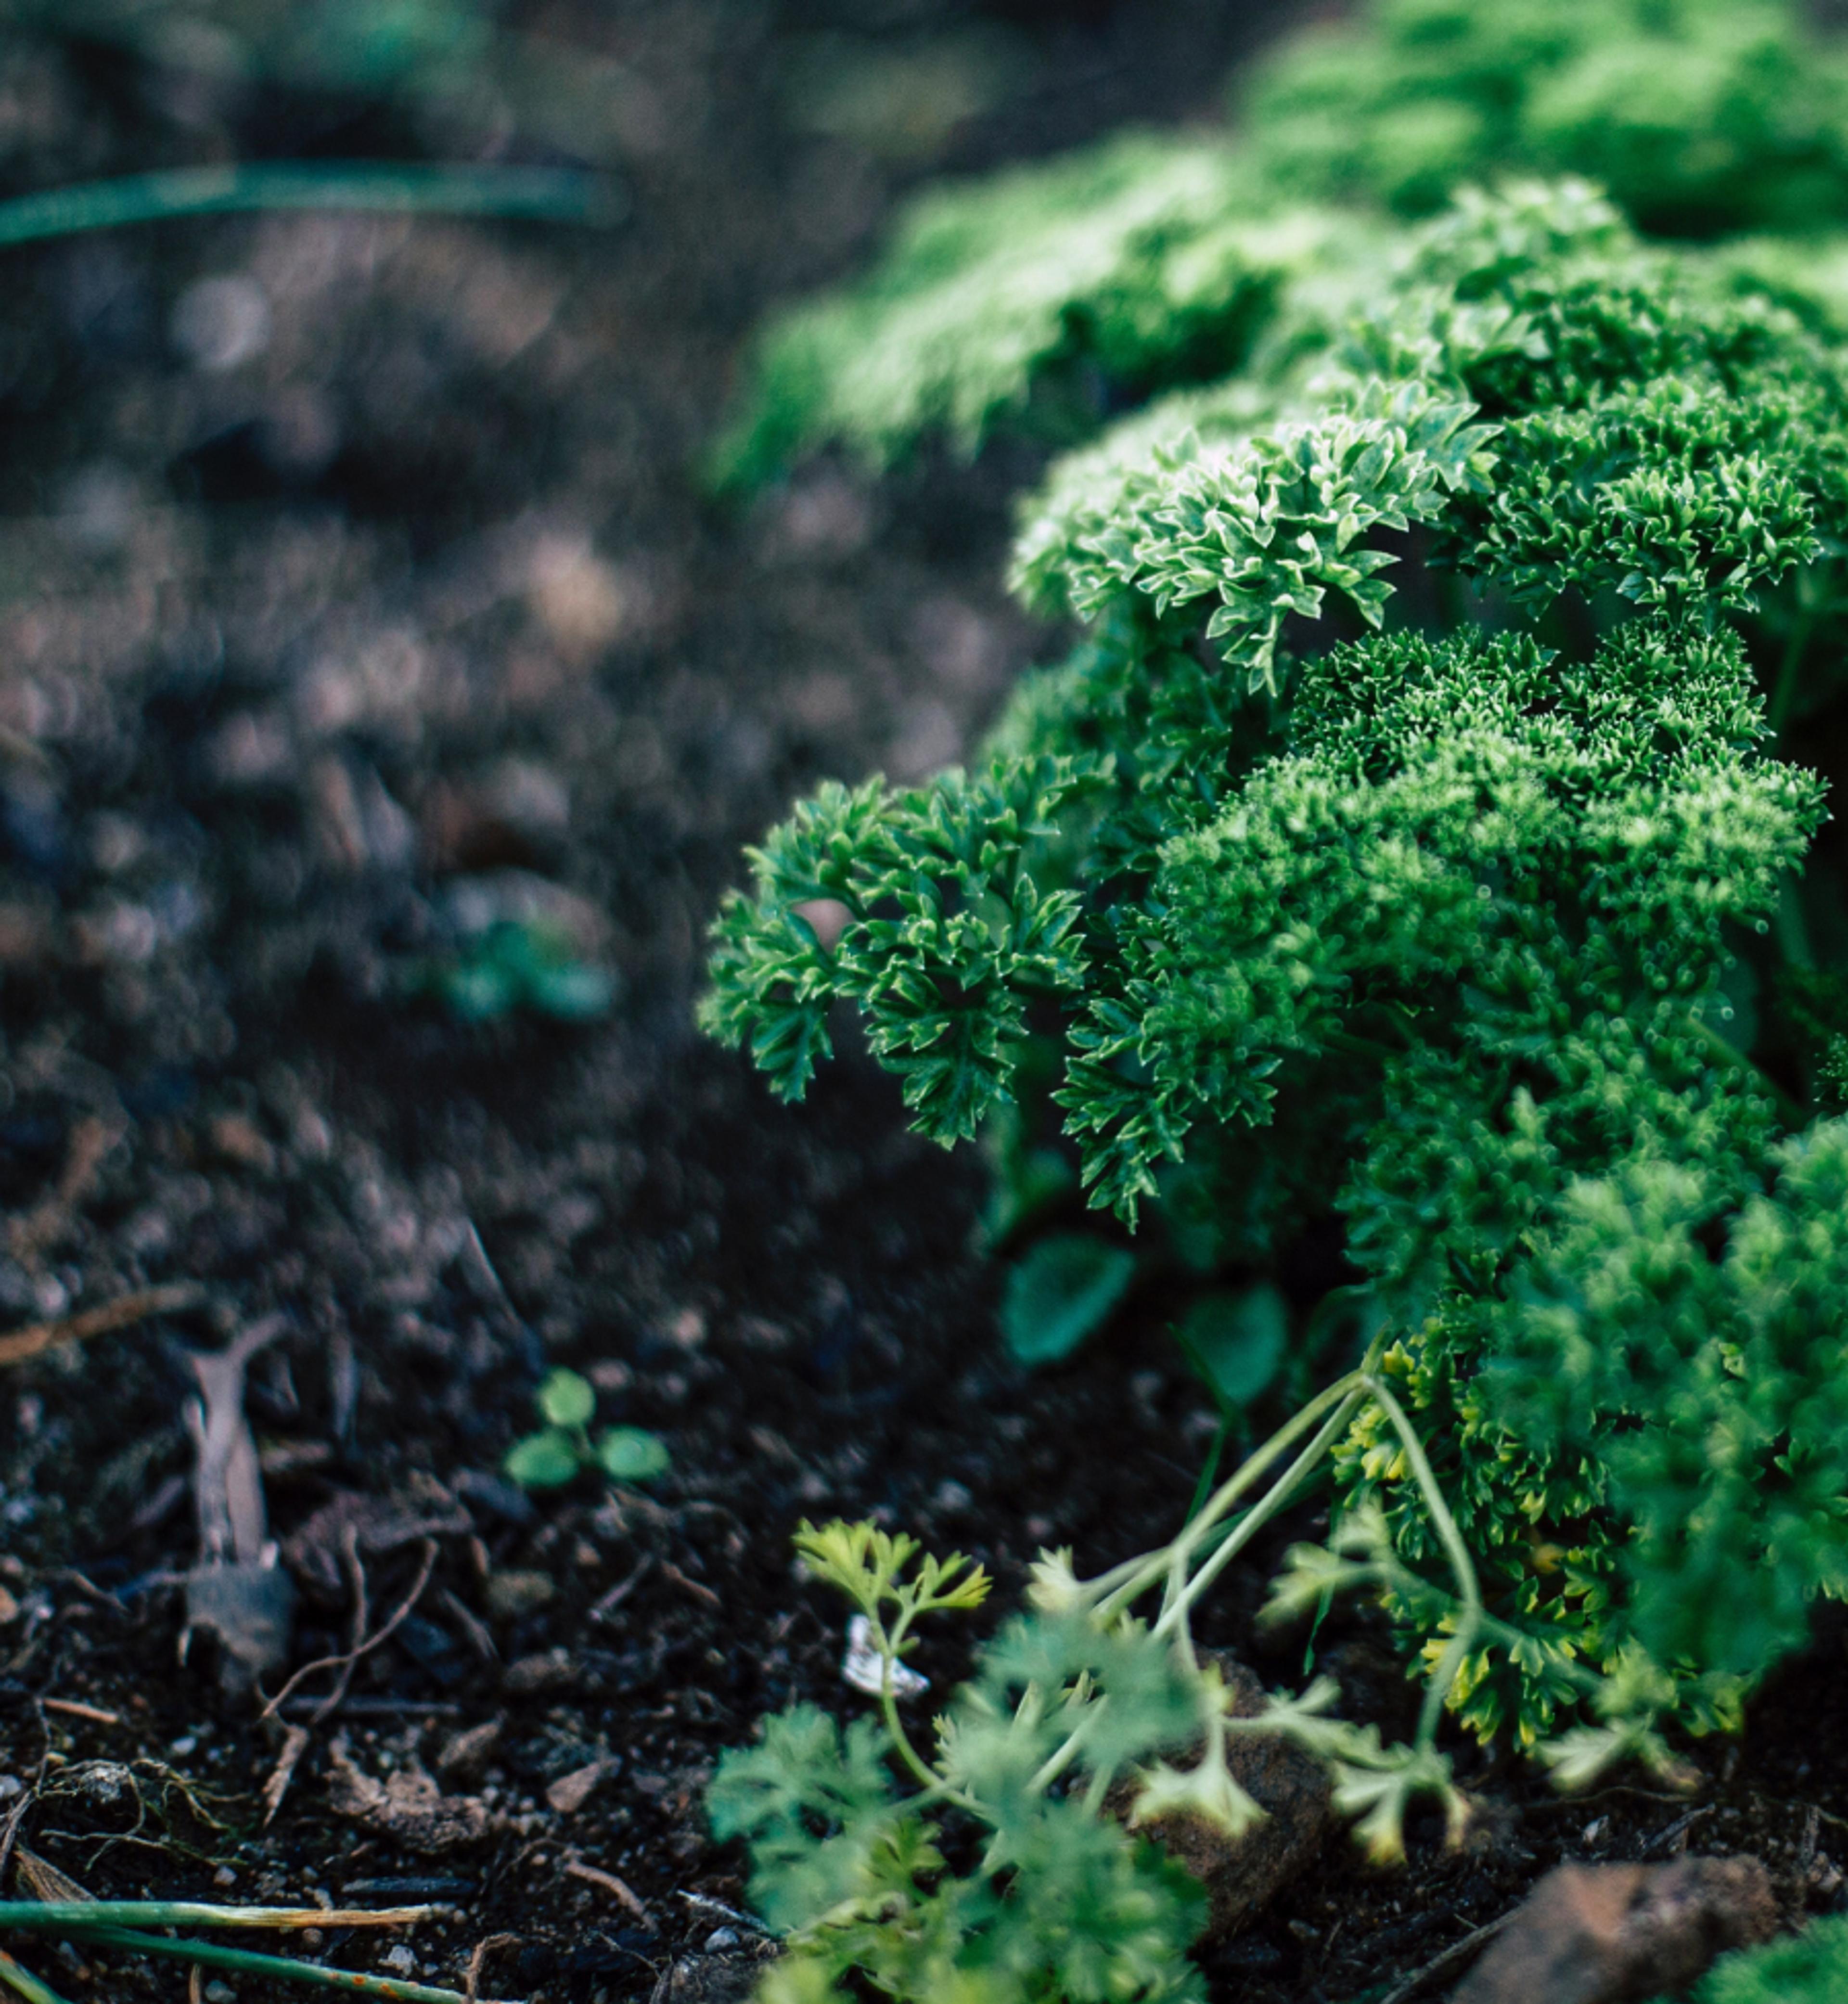 A parsley plant growing in the soil.